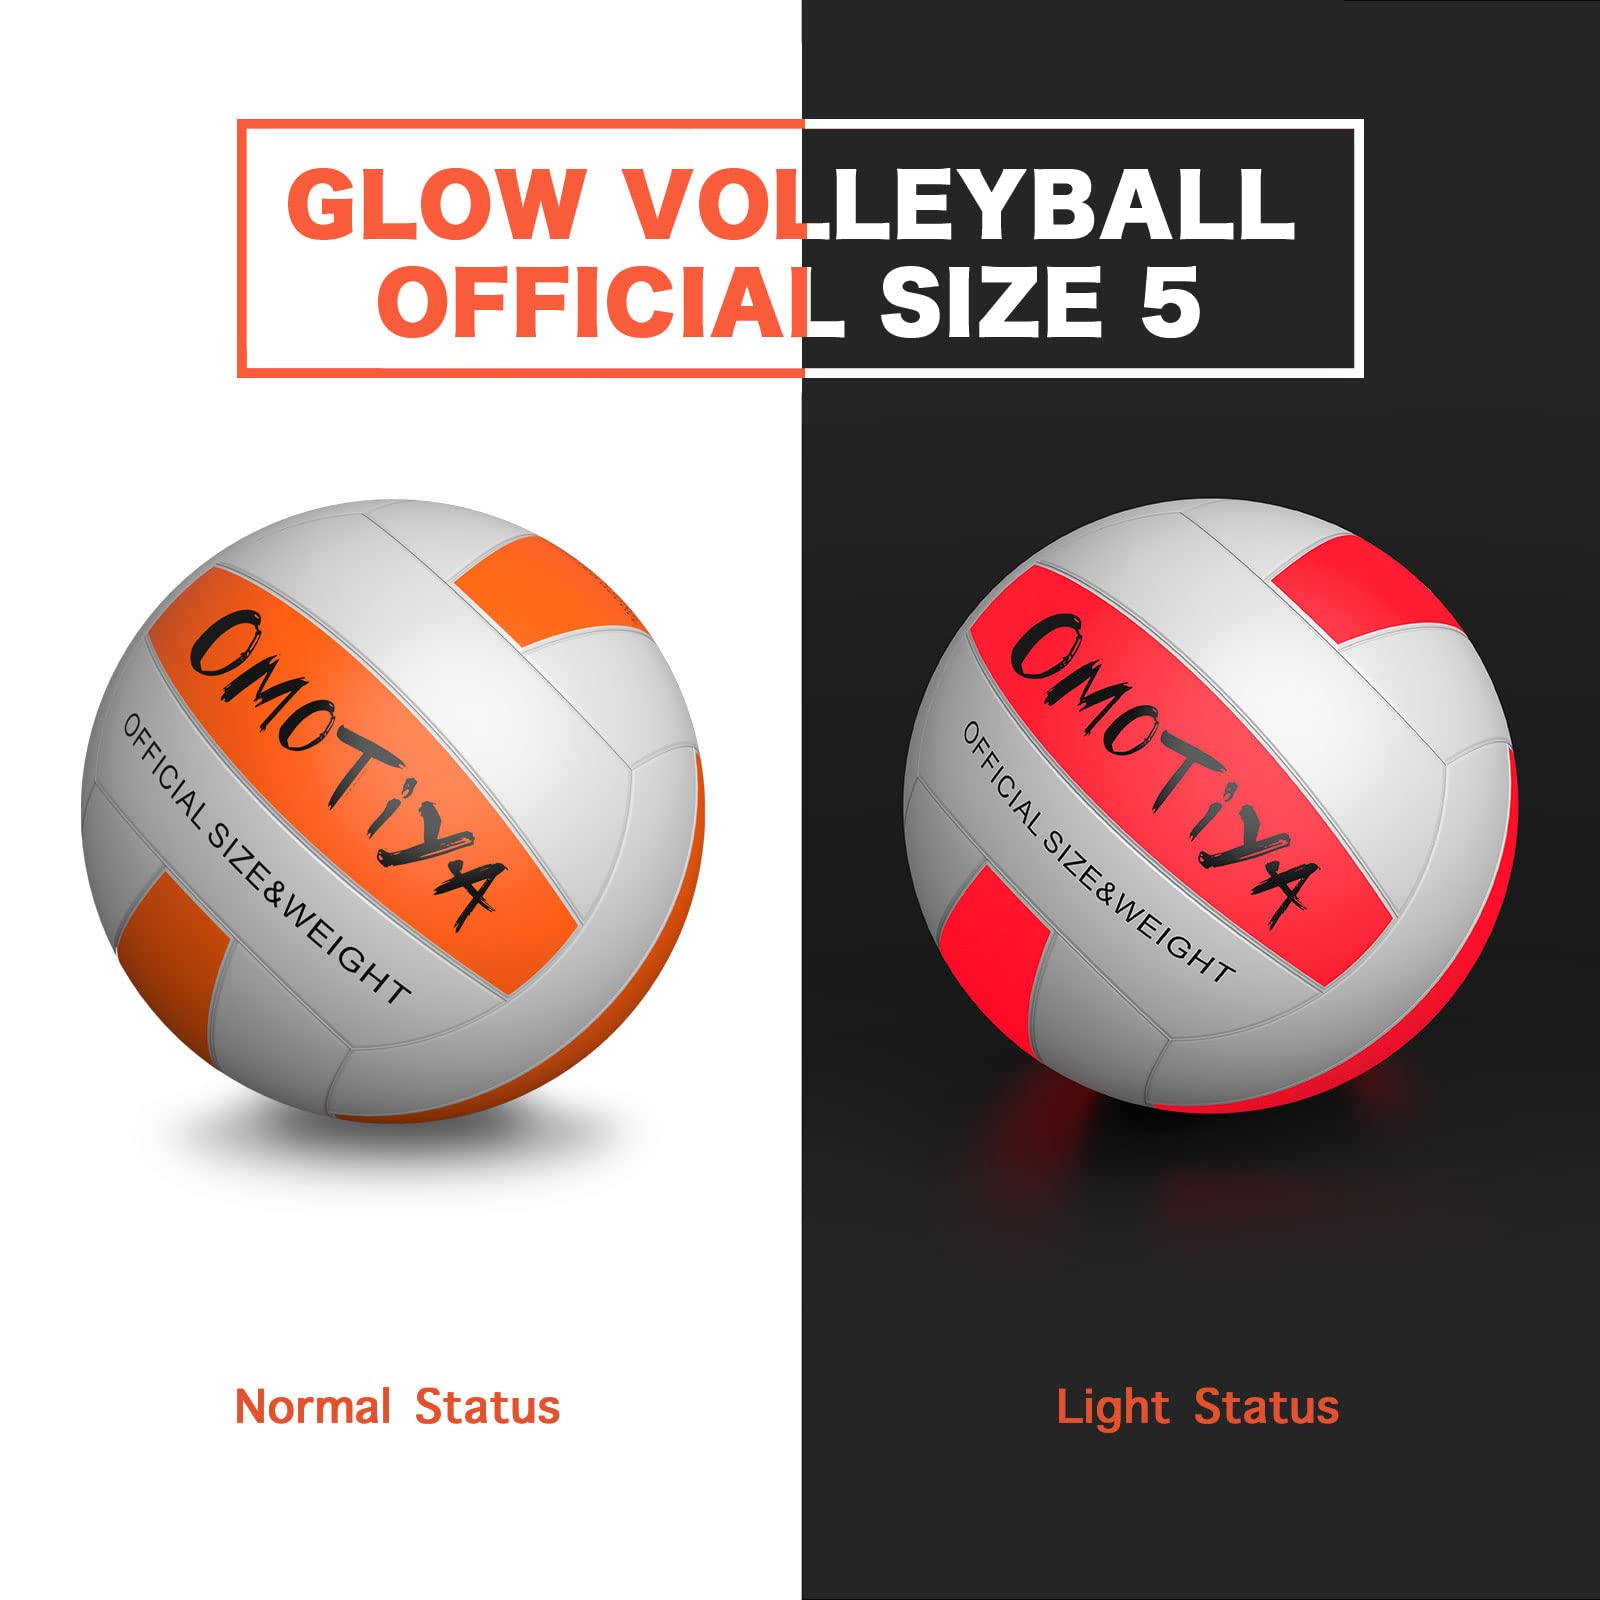 Light Up Volleyball - Glow in the Dark - Size 5 LED Glowing Volleyball Sports Gear Gifts for Boys & Girls 8-15+ Year Old - Kids, Teens Gift Ideas - Cool Toys 8 9 10 11 12 13 14 15 Night Activity